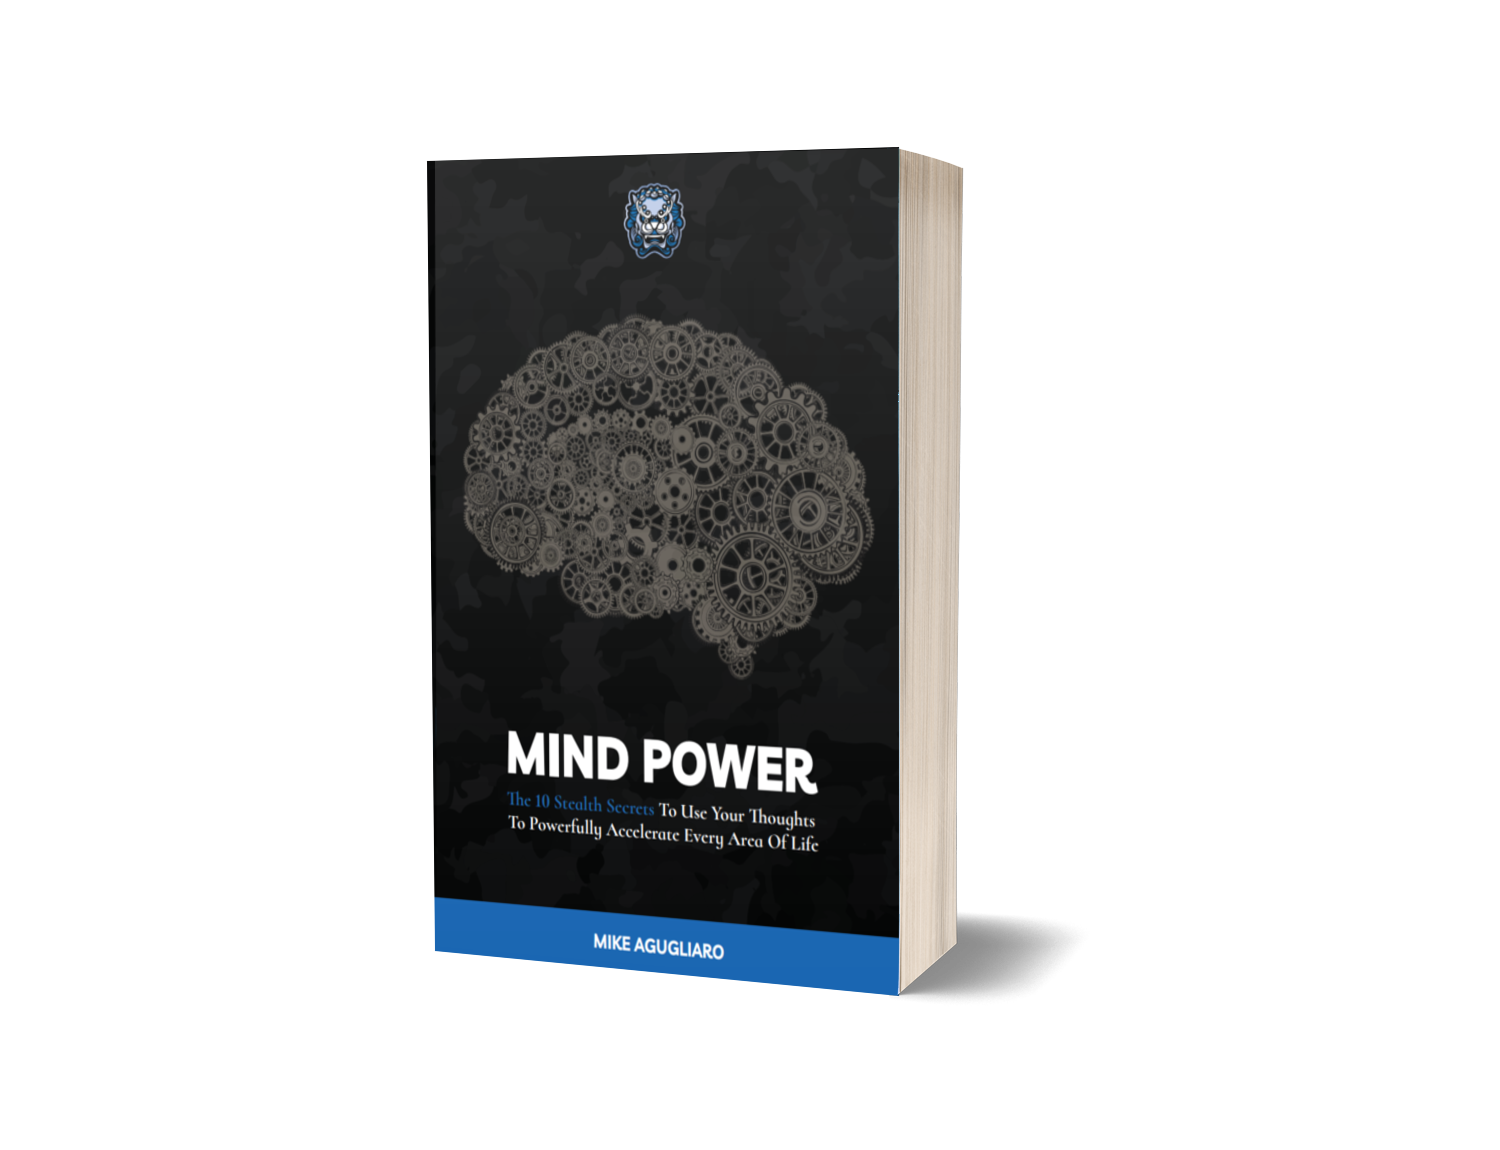 Mind Power: 10 Stealth Secrets To Use Your Thoughts To Powerfully Accelerate Every Area Of Life